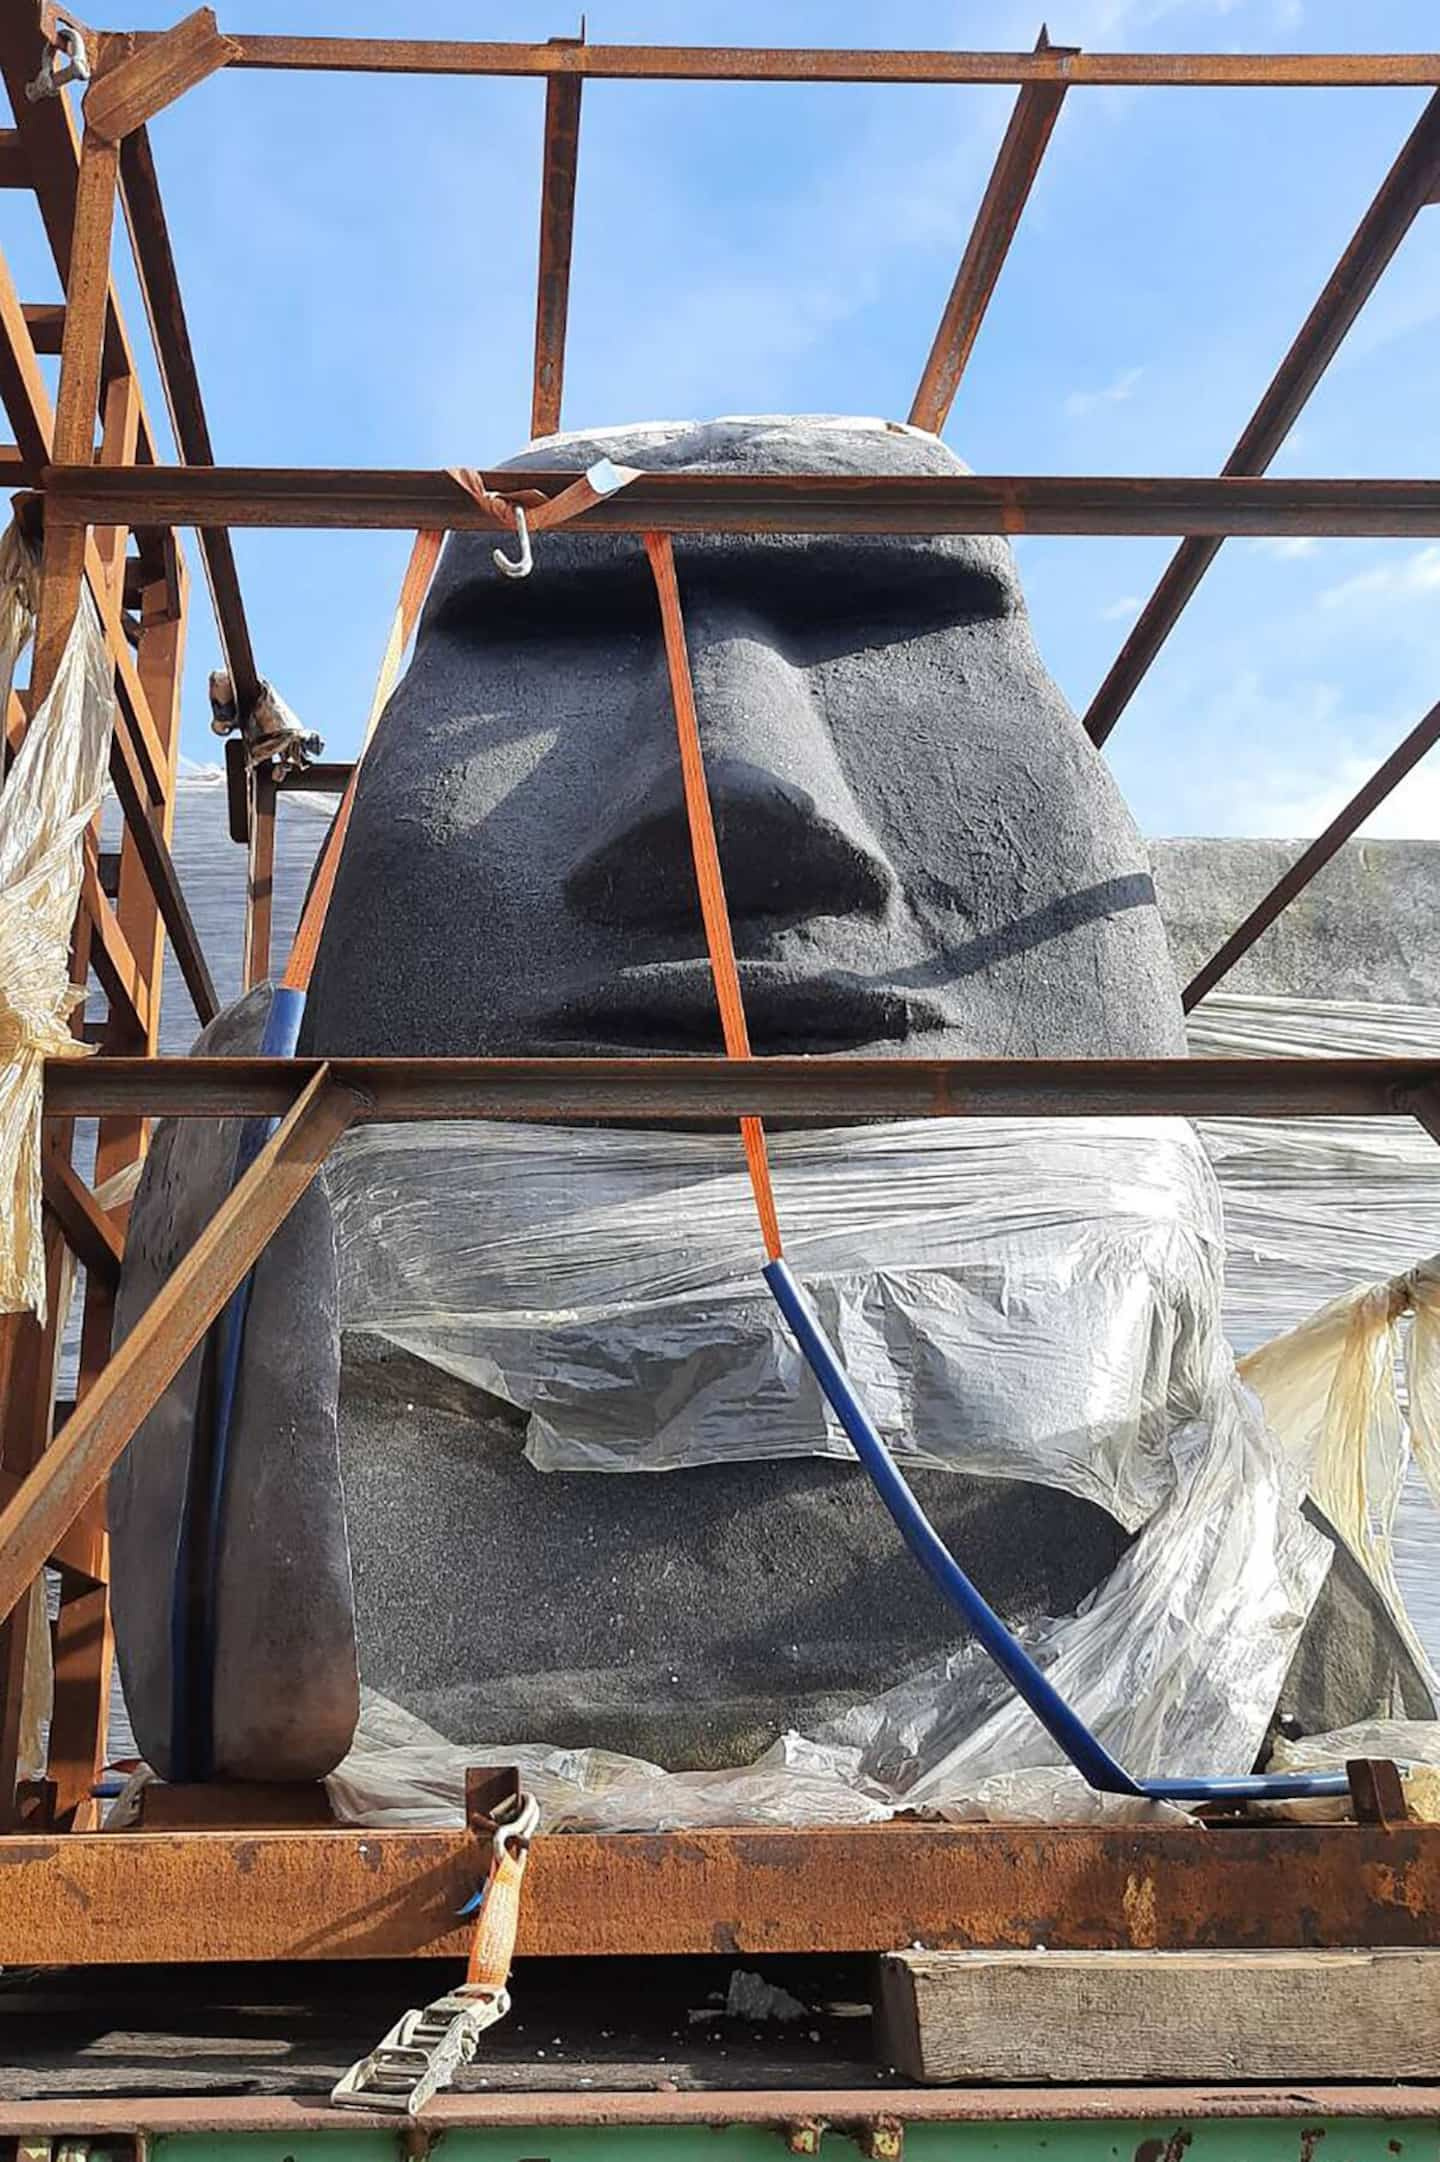 Thailand: 200 kg of drugs hidden in a replica of a statue on Easter Island